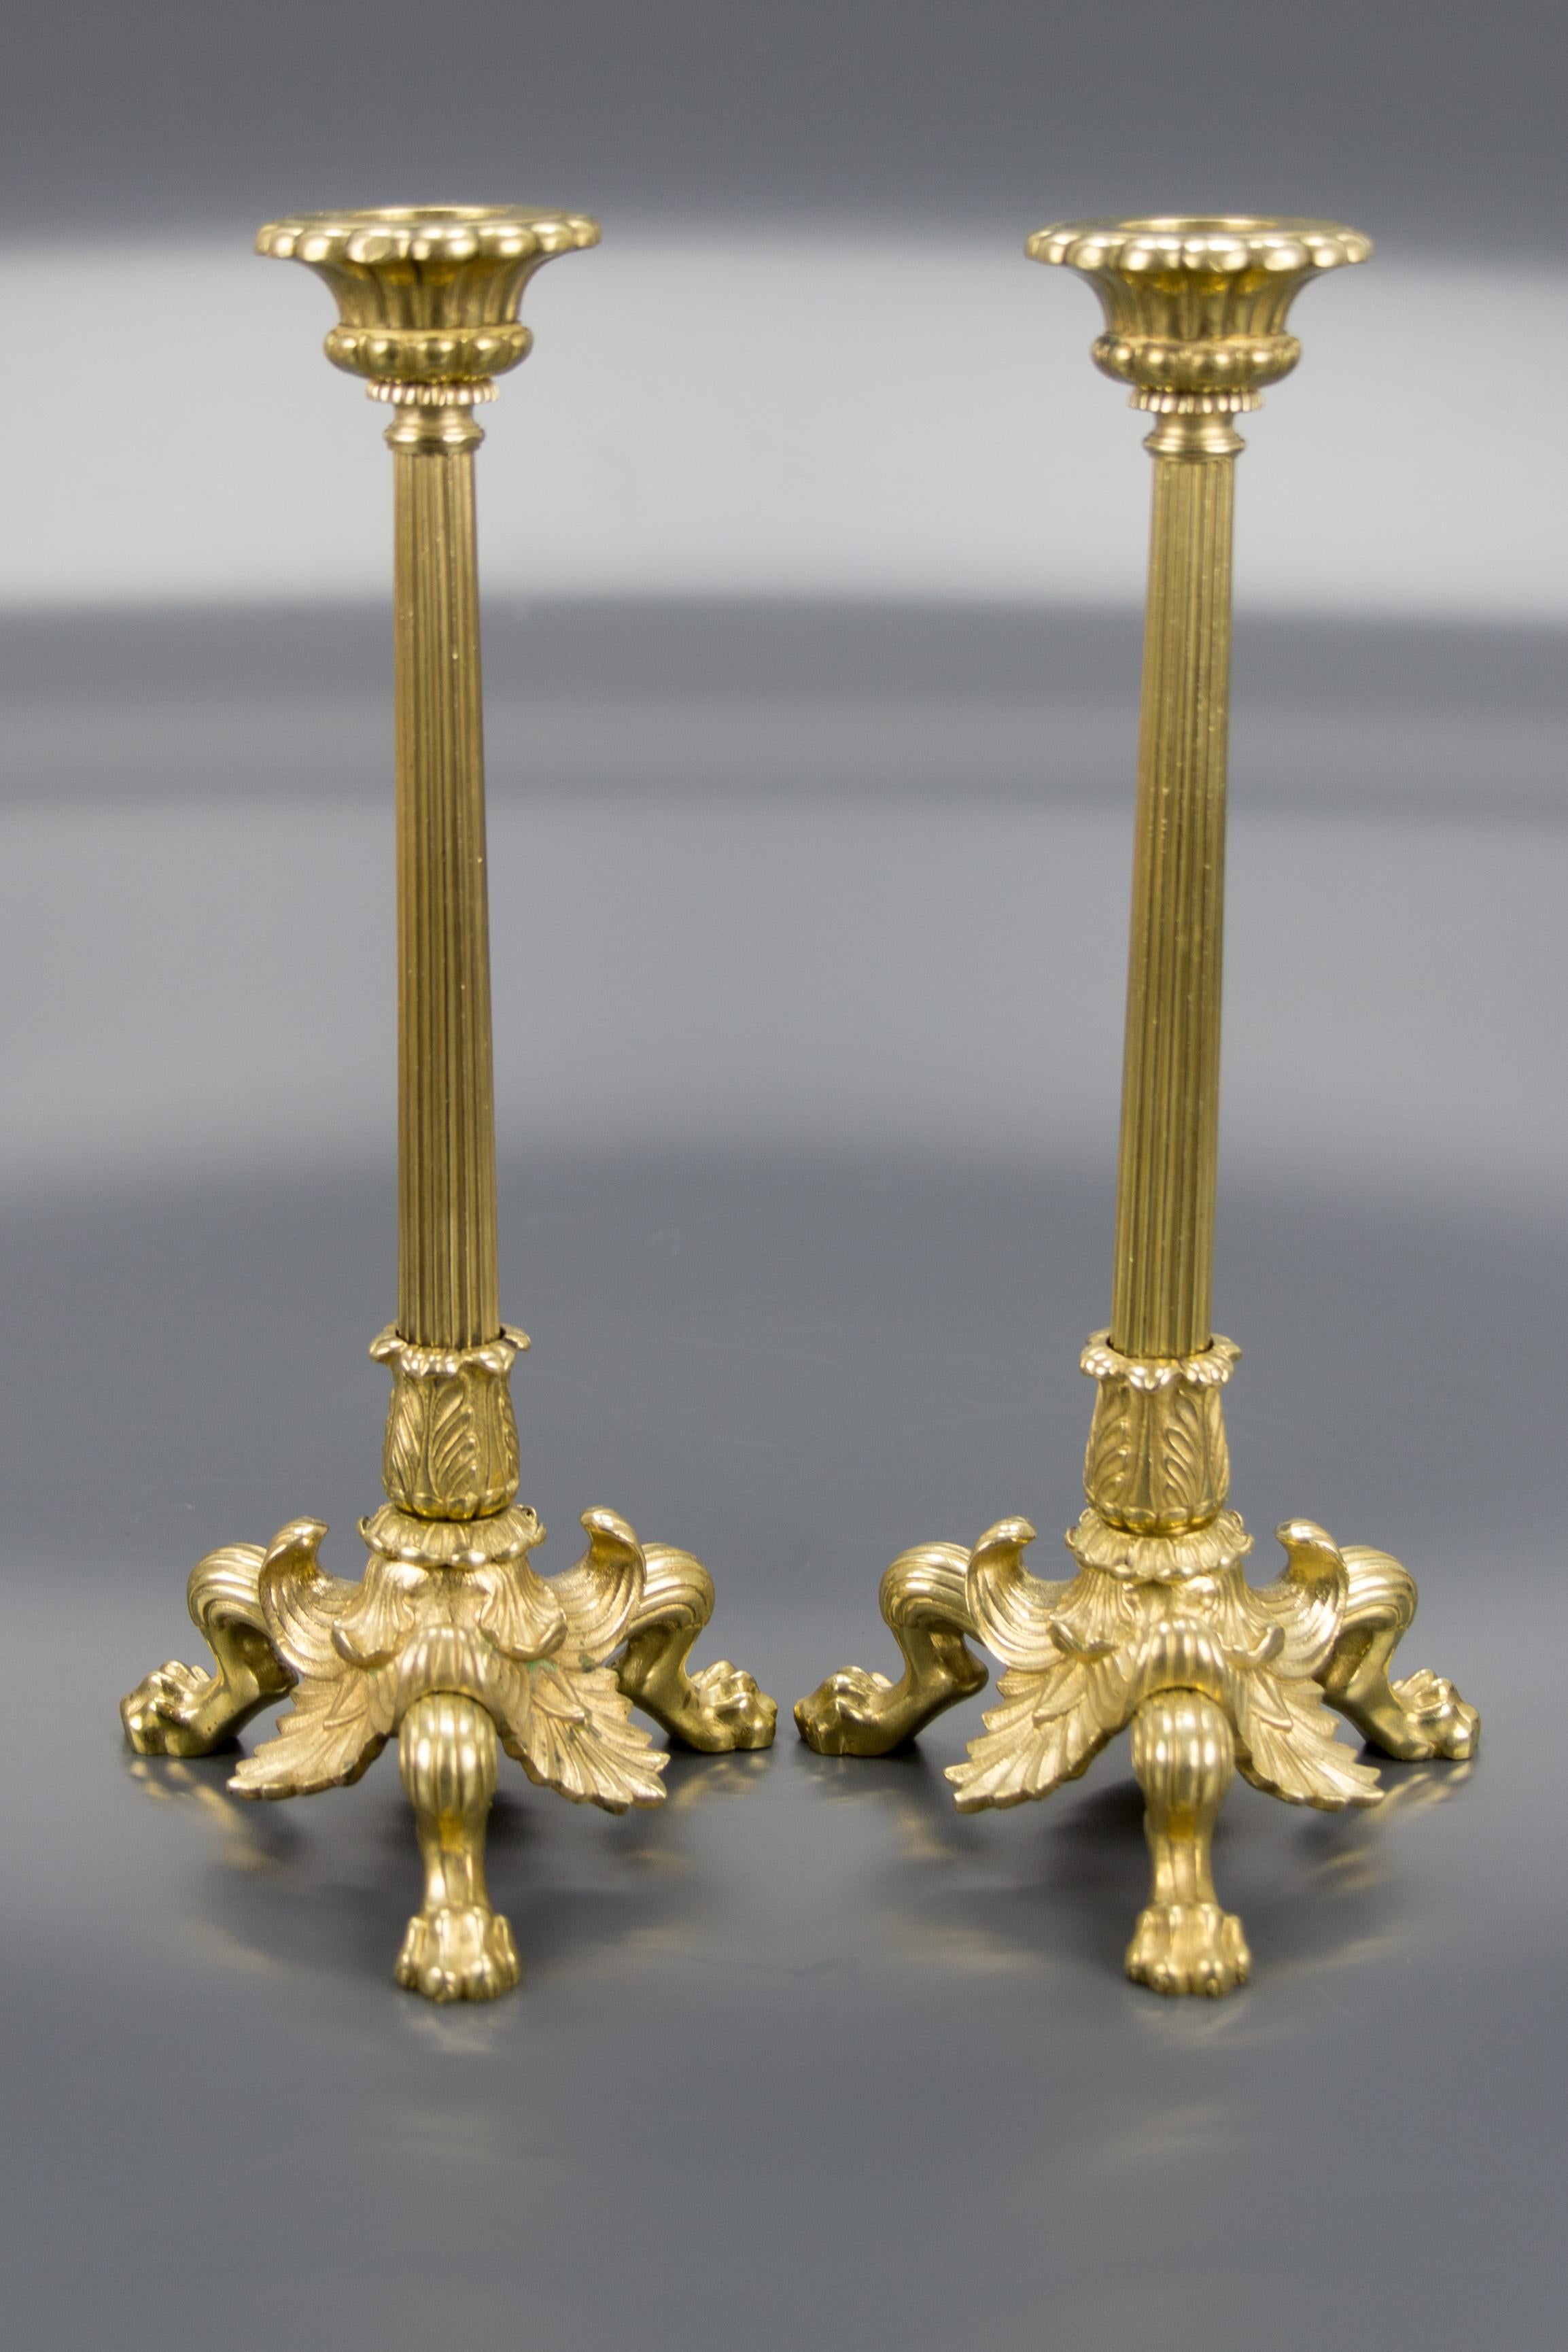 A beautiful pair of French Empire style bronze and brass candlesticks. Each candlestick features a fluted columnar stem, ornate collar, and is raised on three elaborately leaf-capped lion paws. These elegant antique candlesticks make a wonderful